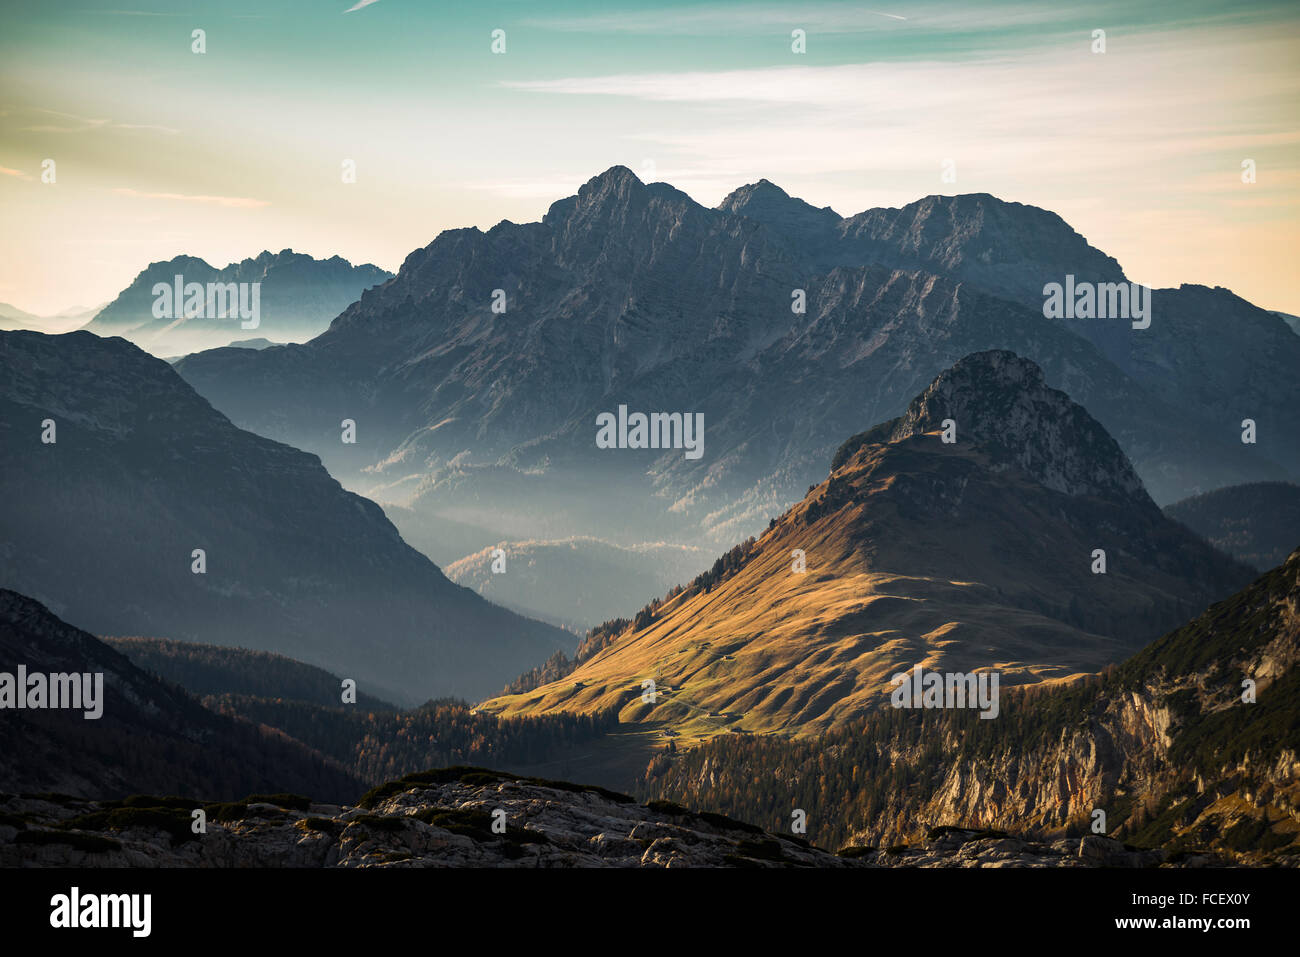 Late autumn sunset with warm sunlight on alpine pastures and the Austrian mountain cliffs and peaks of Loferer Steinberge Stock Photo